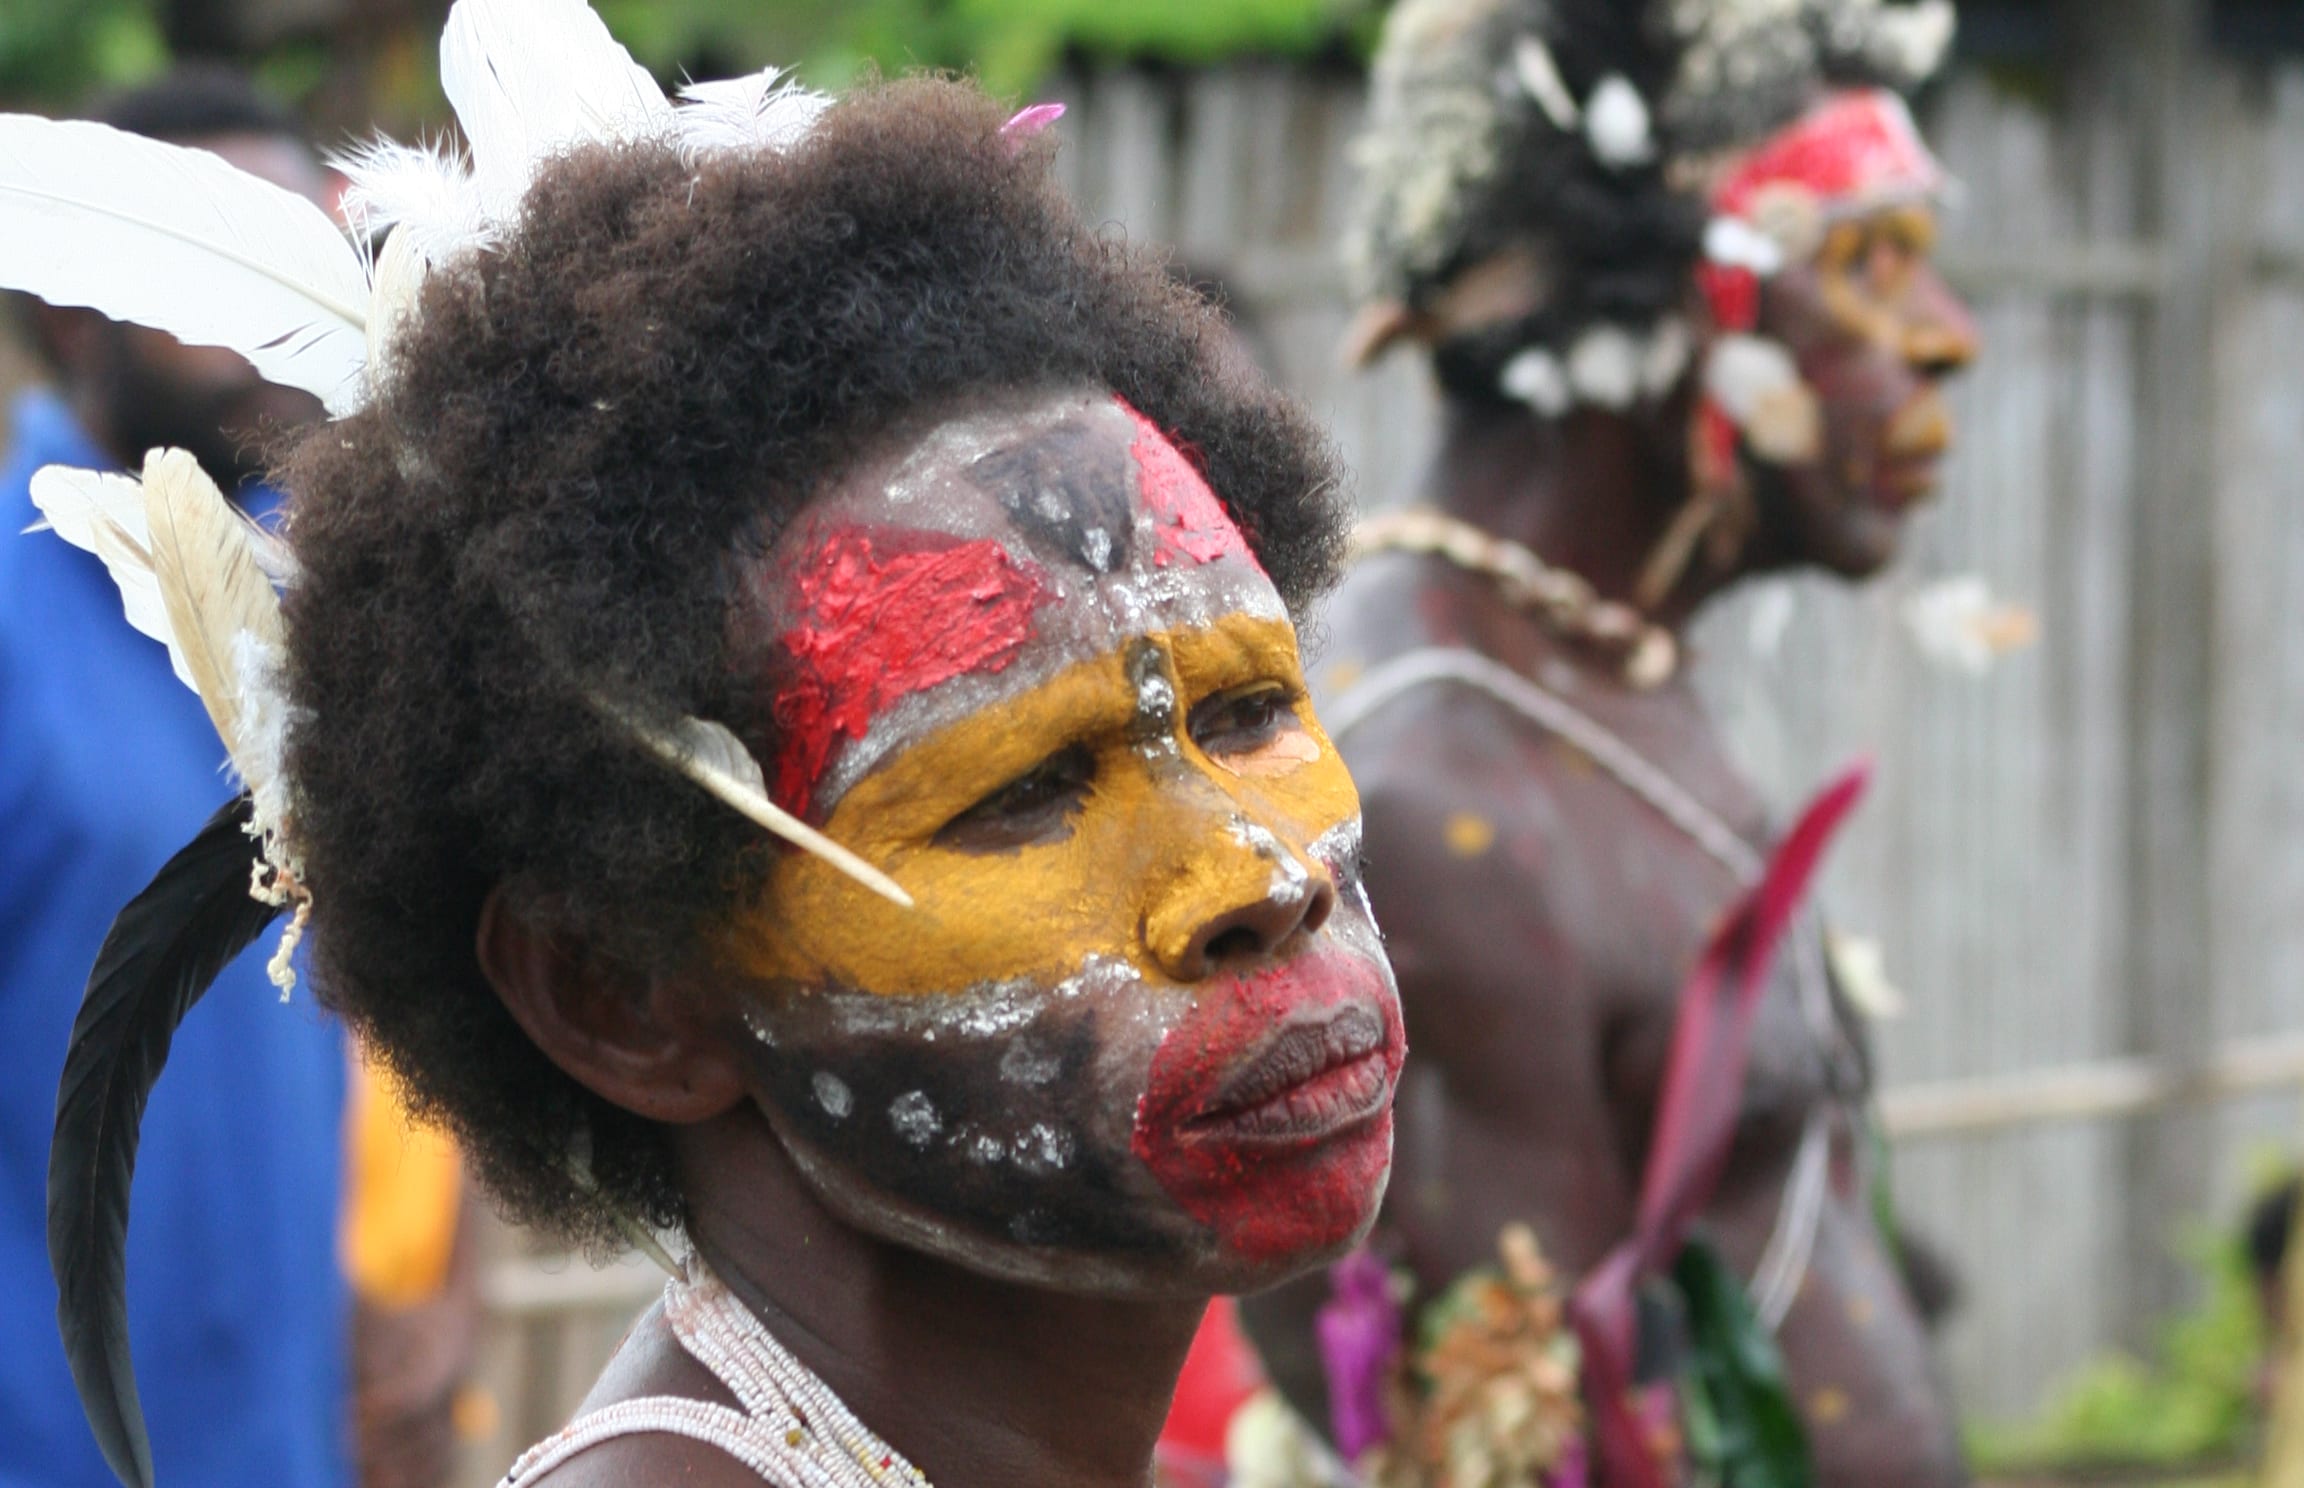 Woman at election rally, East Sepik, PNG.